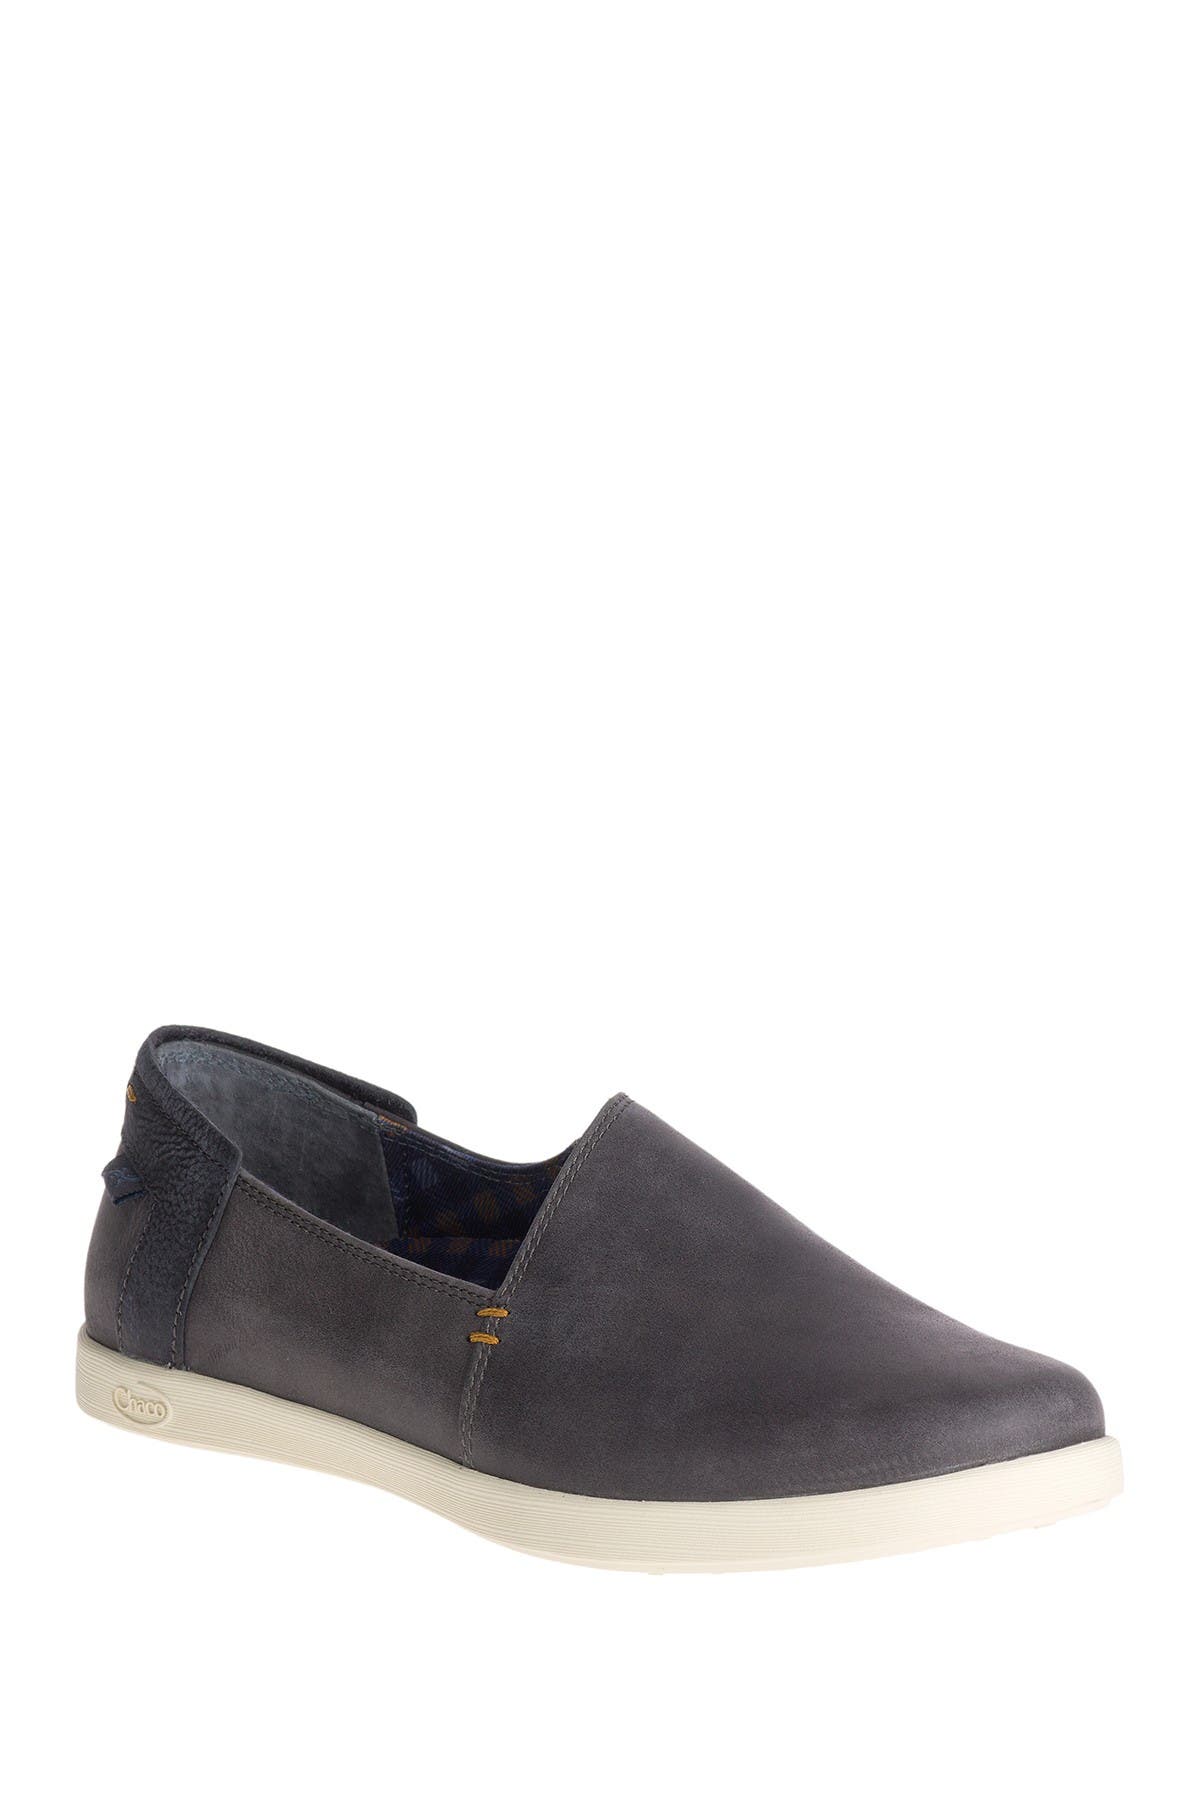 Chaco | Ionia Leather Slip-On Sneaker 